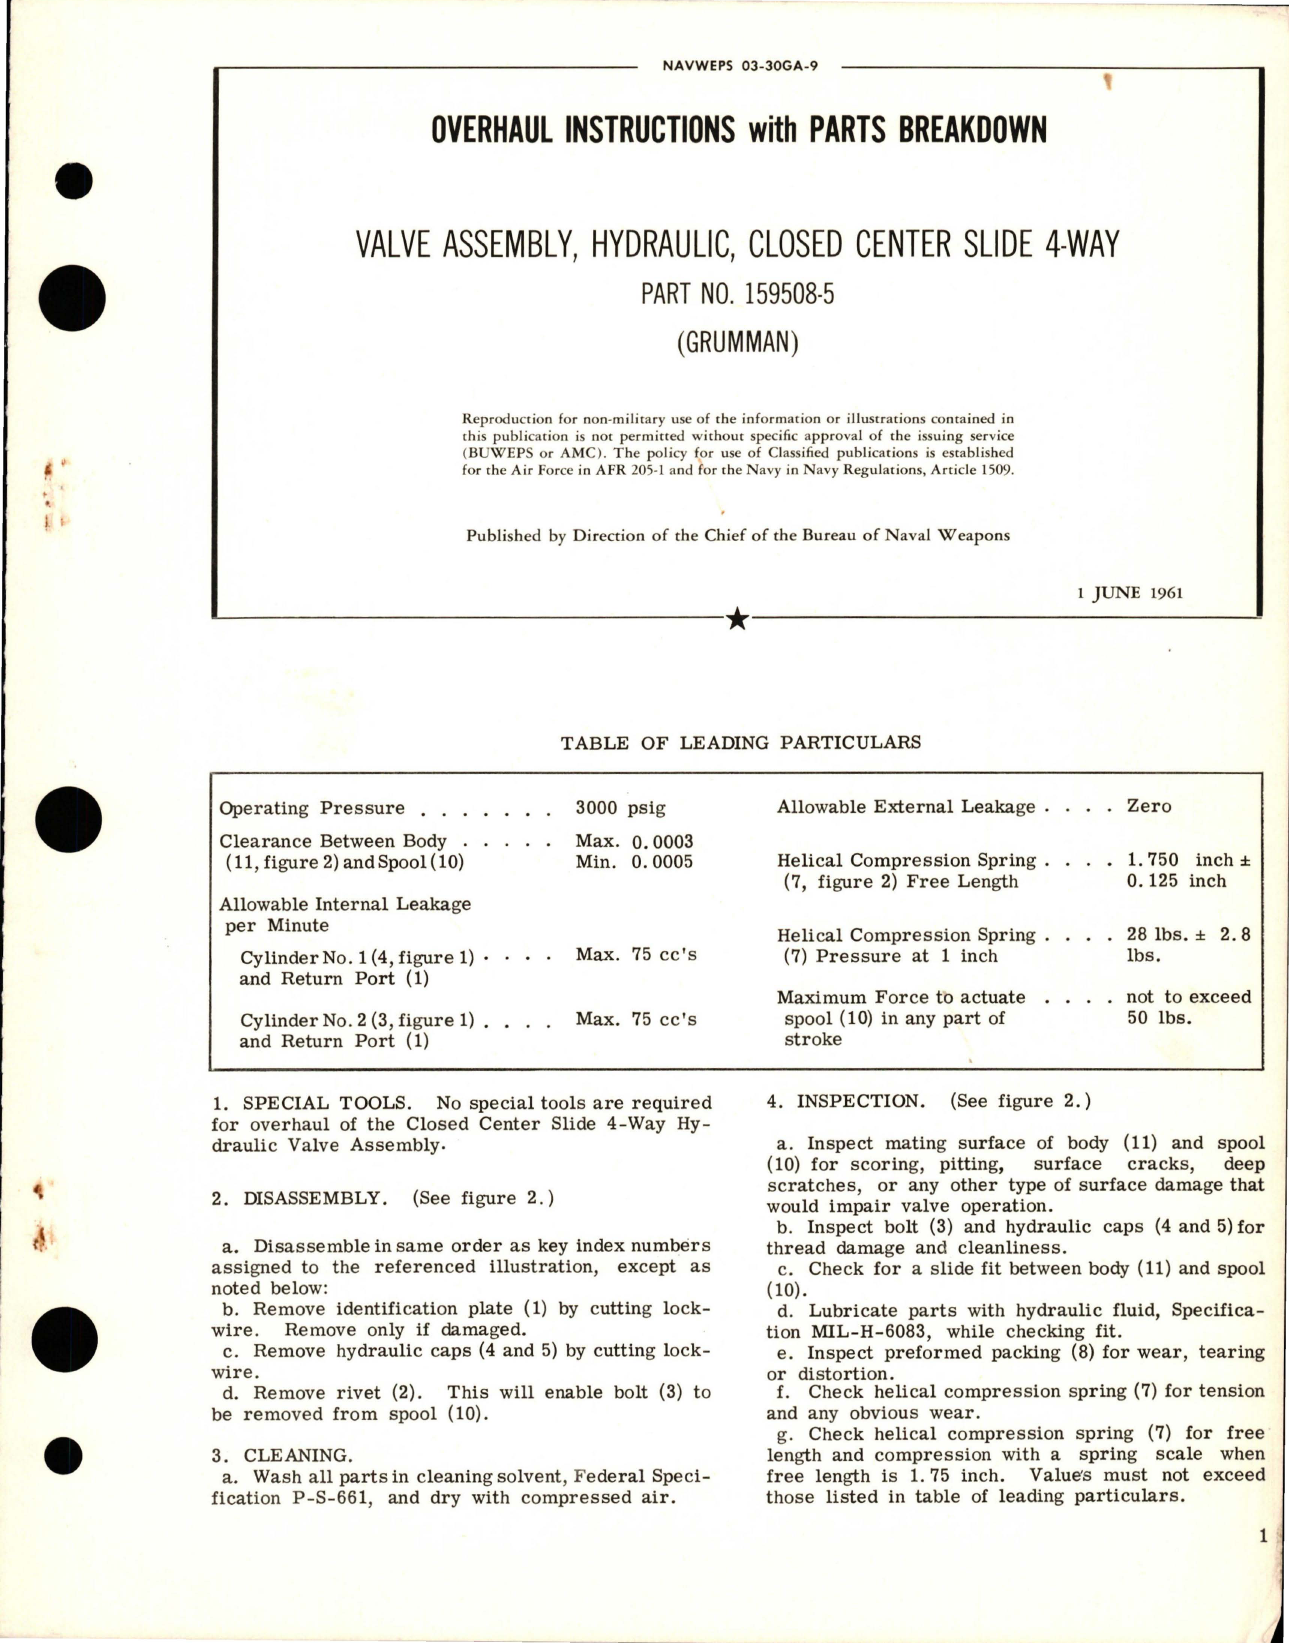 Sample page 1 from AirCorps Library document: Overhaul Instructions with Parts Breakdown for Closed Center Slide 4-Way Hydraulic Valve Assembly - Part 159508-5 